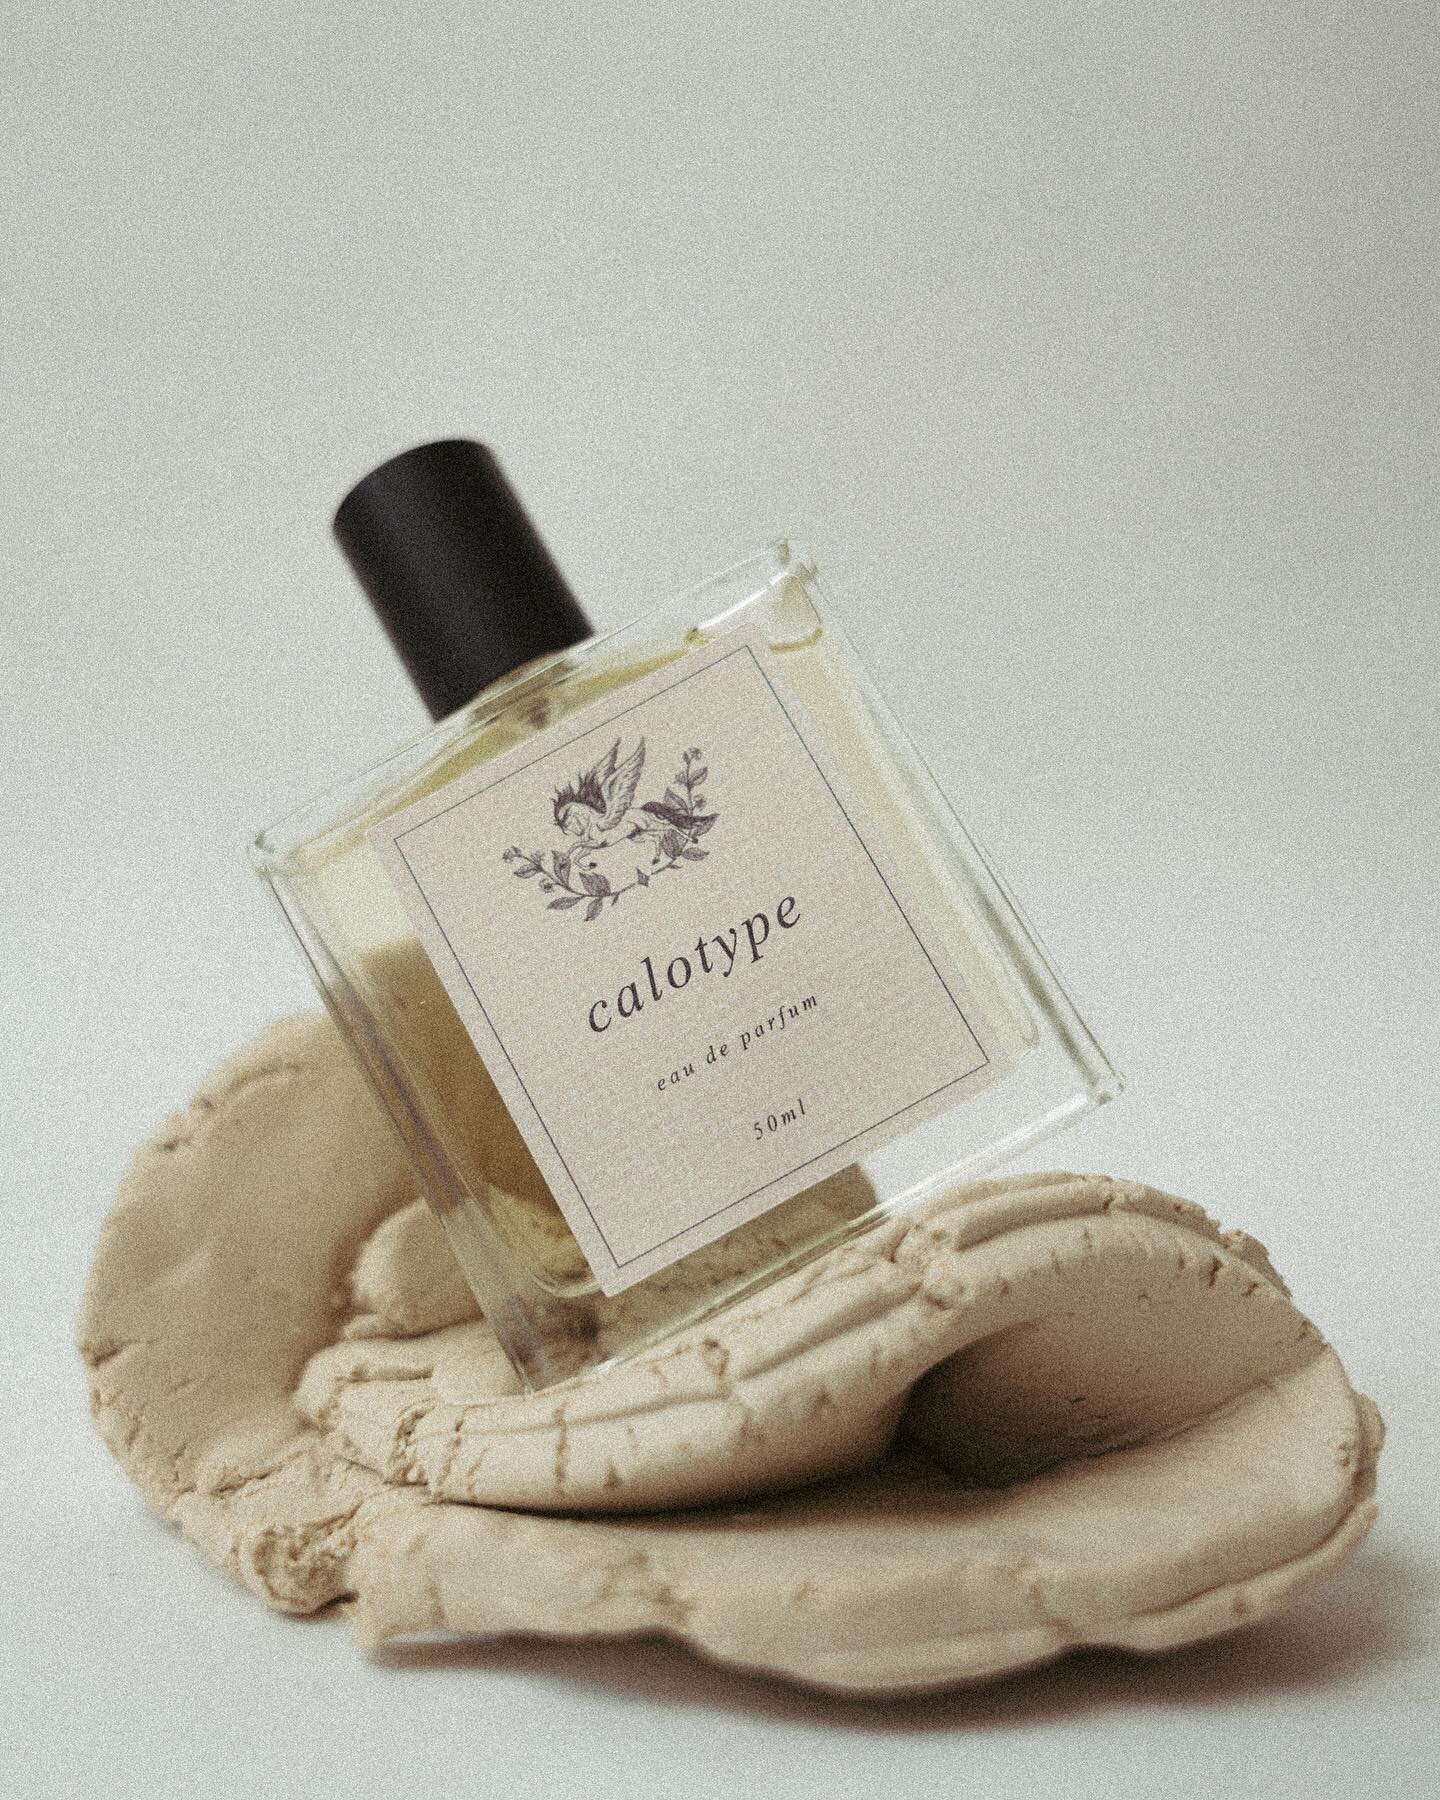 Some perfumes are people, others are places. Calotype is a feeling.

Truthfully, it was inspired by the very human experience of having a body and feeling weird about it. Simultaneously feeling like a stranger to it, but also at home in it. Wanting t